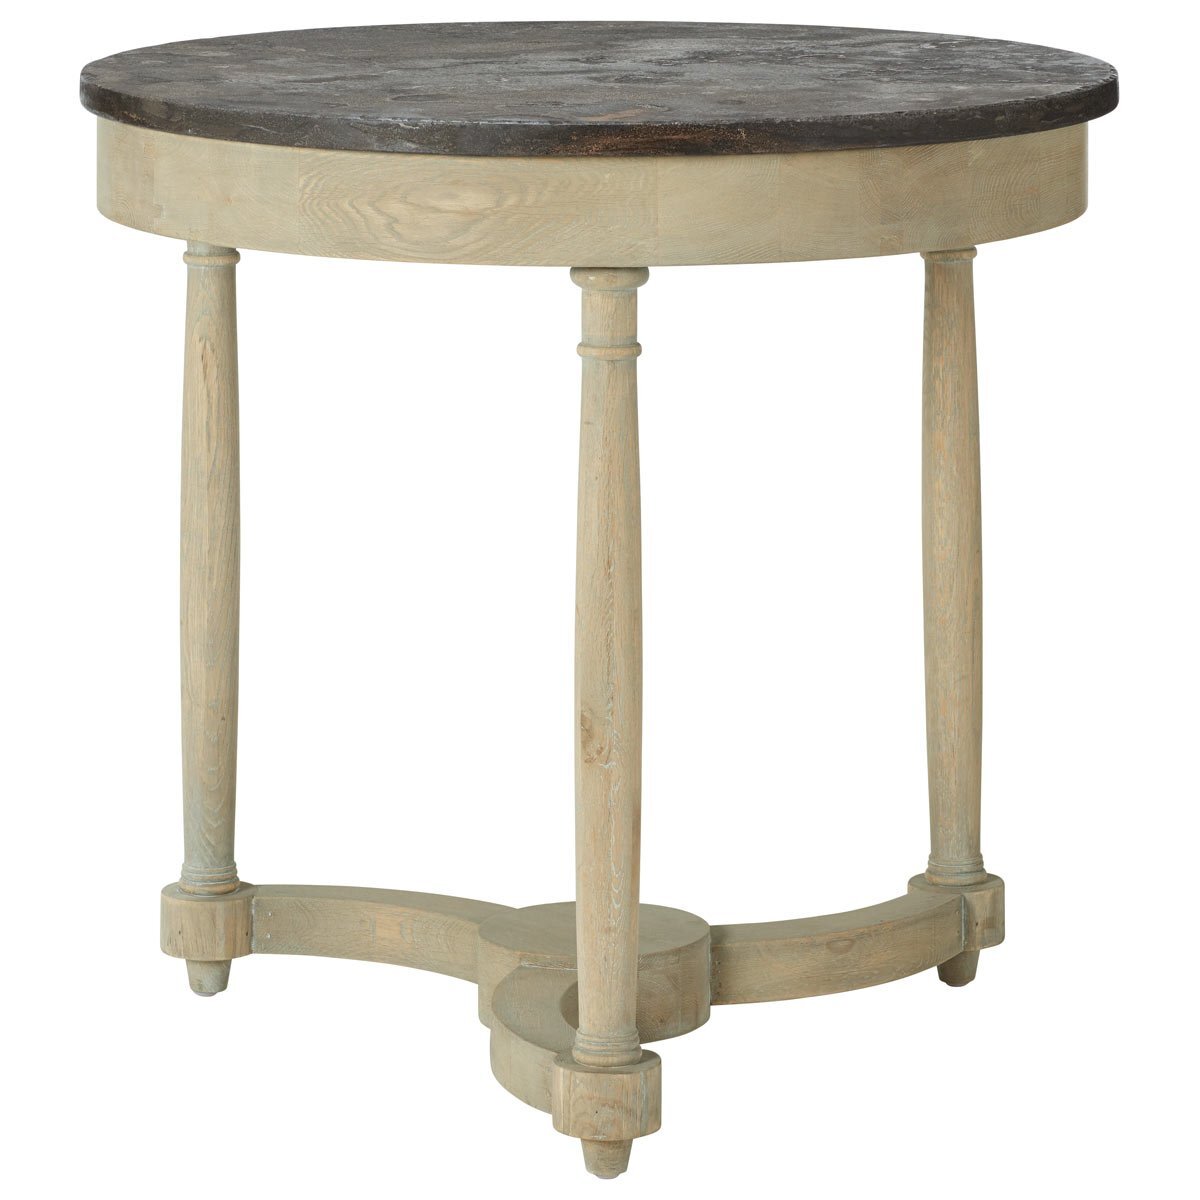 This round side-table is so versatile and would work well in a variety of interior stylesCLICK HERE TO SHOP